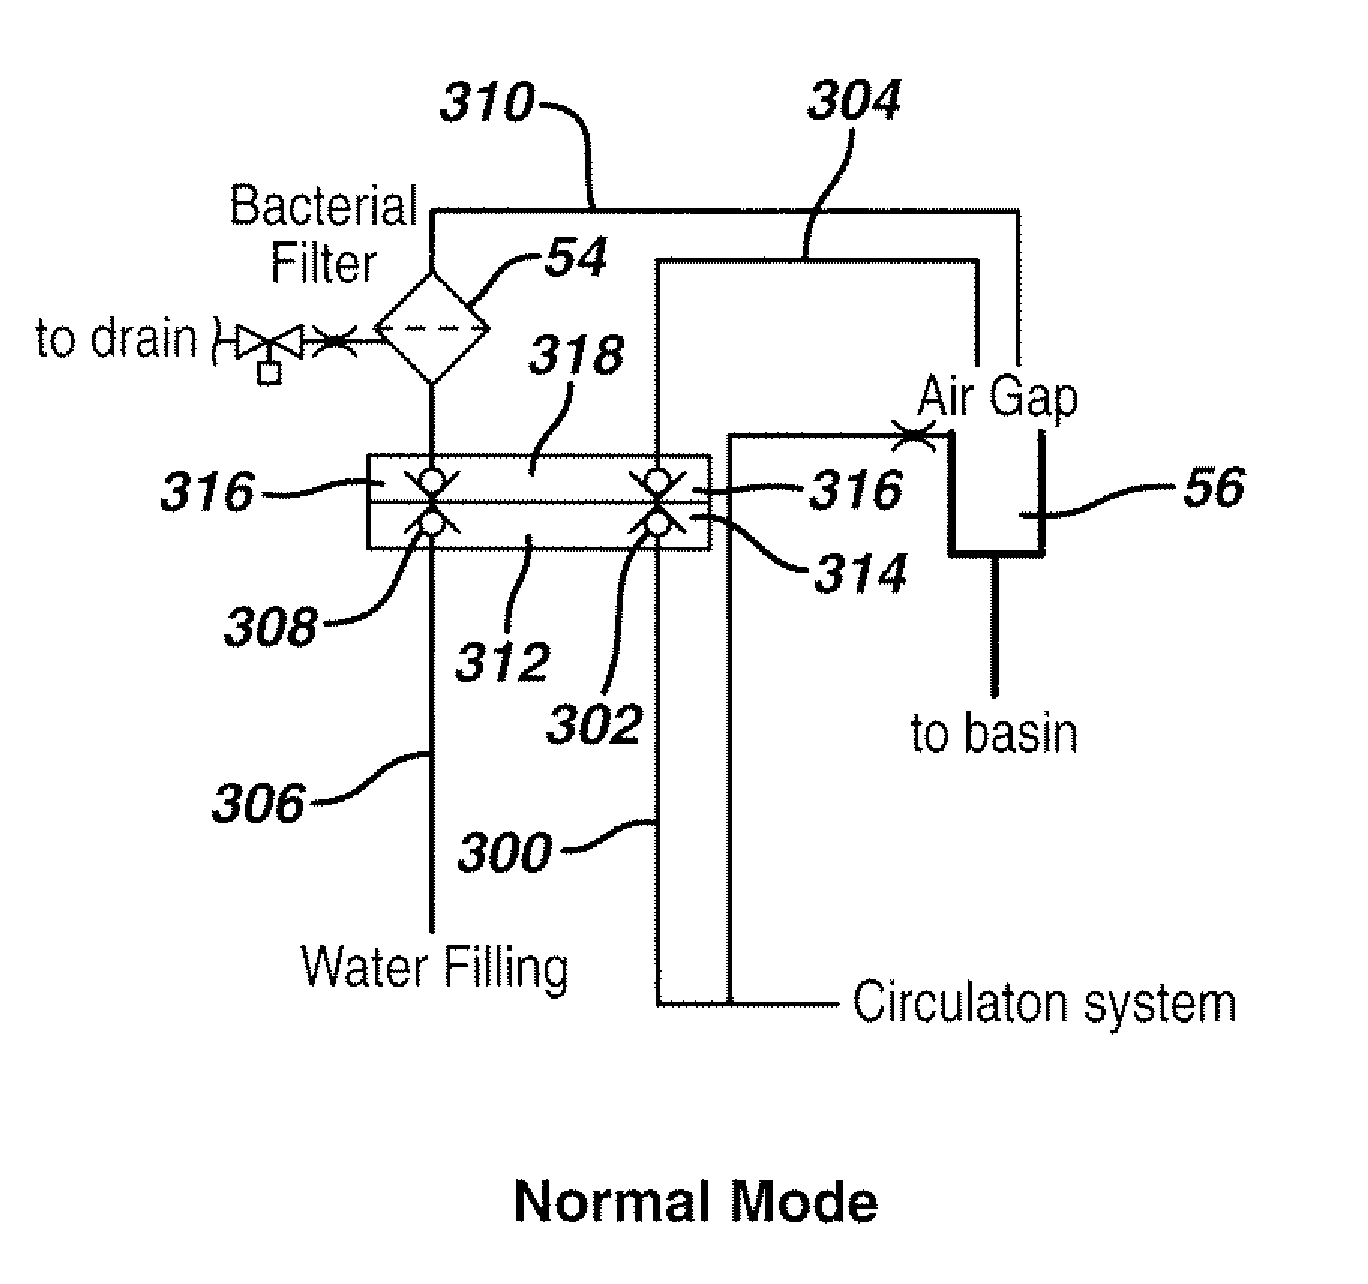 Automated endoscope reprocessor germicide concentration monitoring system and method